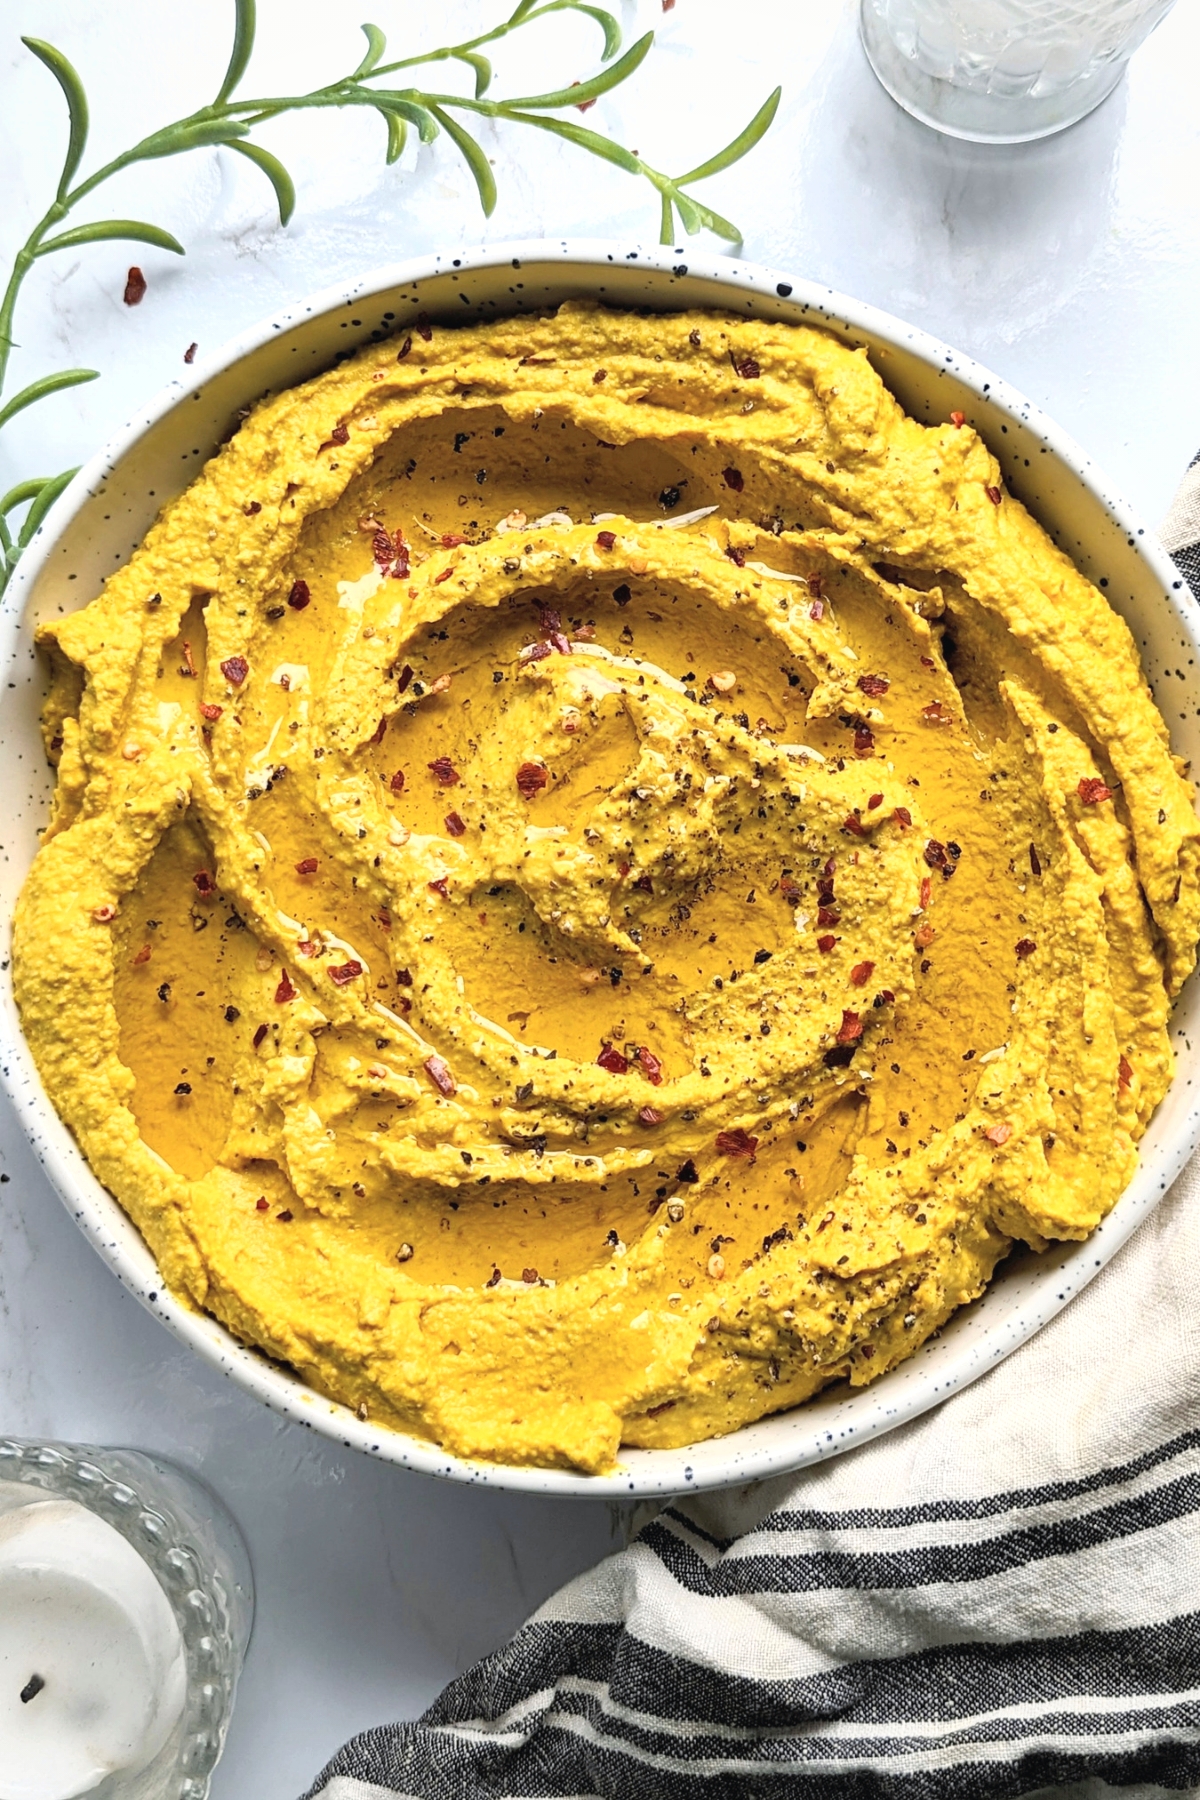 hummus with turmeric recipes snacks with turmeric healthy curcumin recipes with black pepper and turmeric.